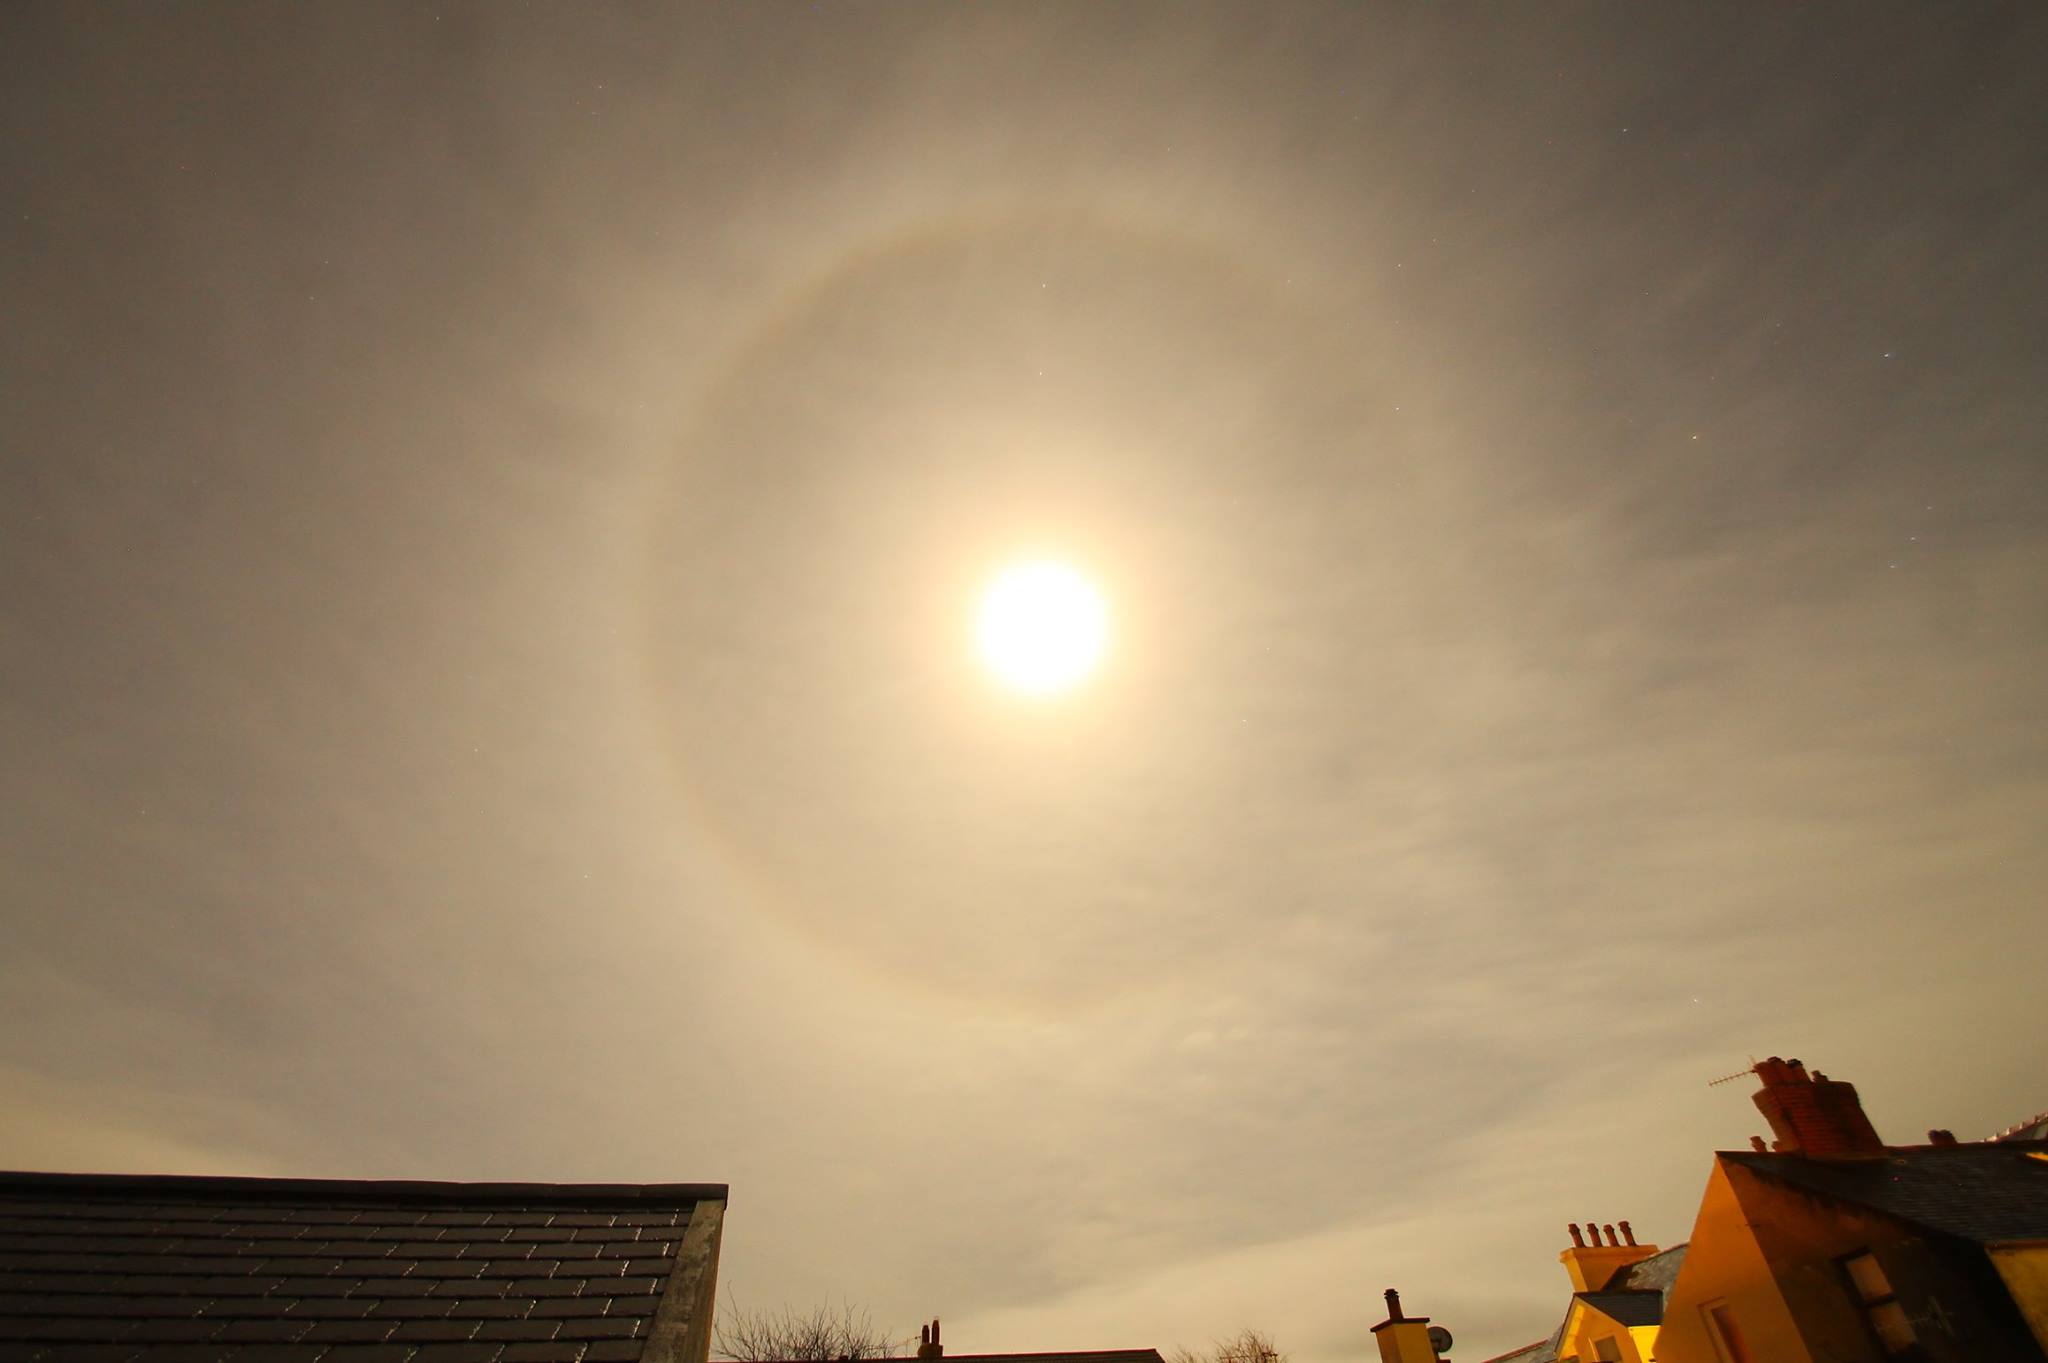 Moon Halo seen over Peel, by Dave Corkish